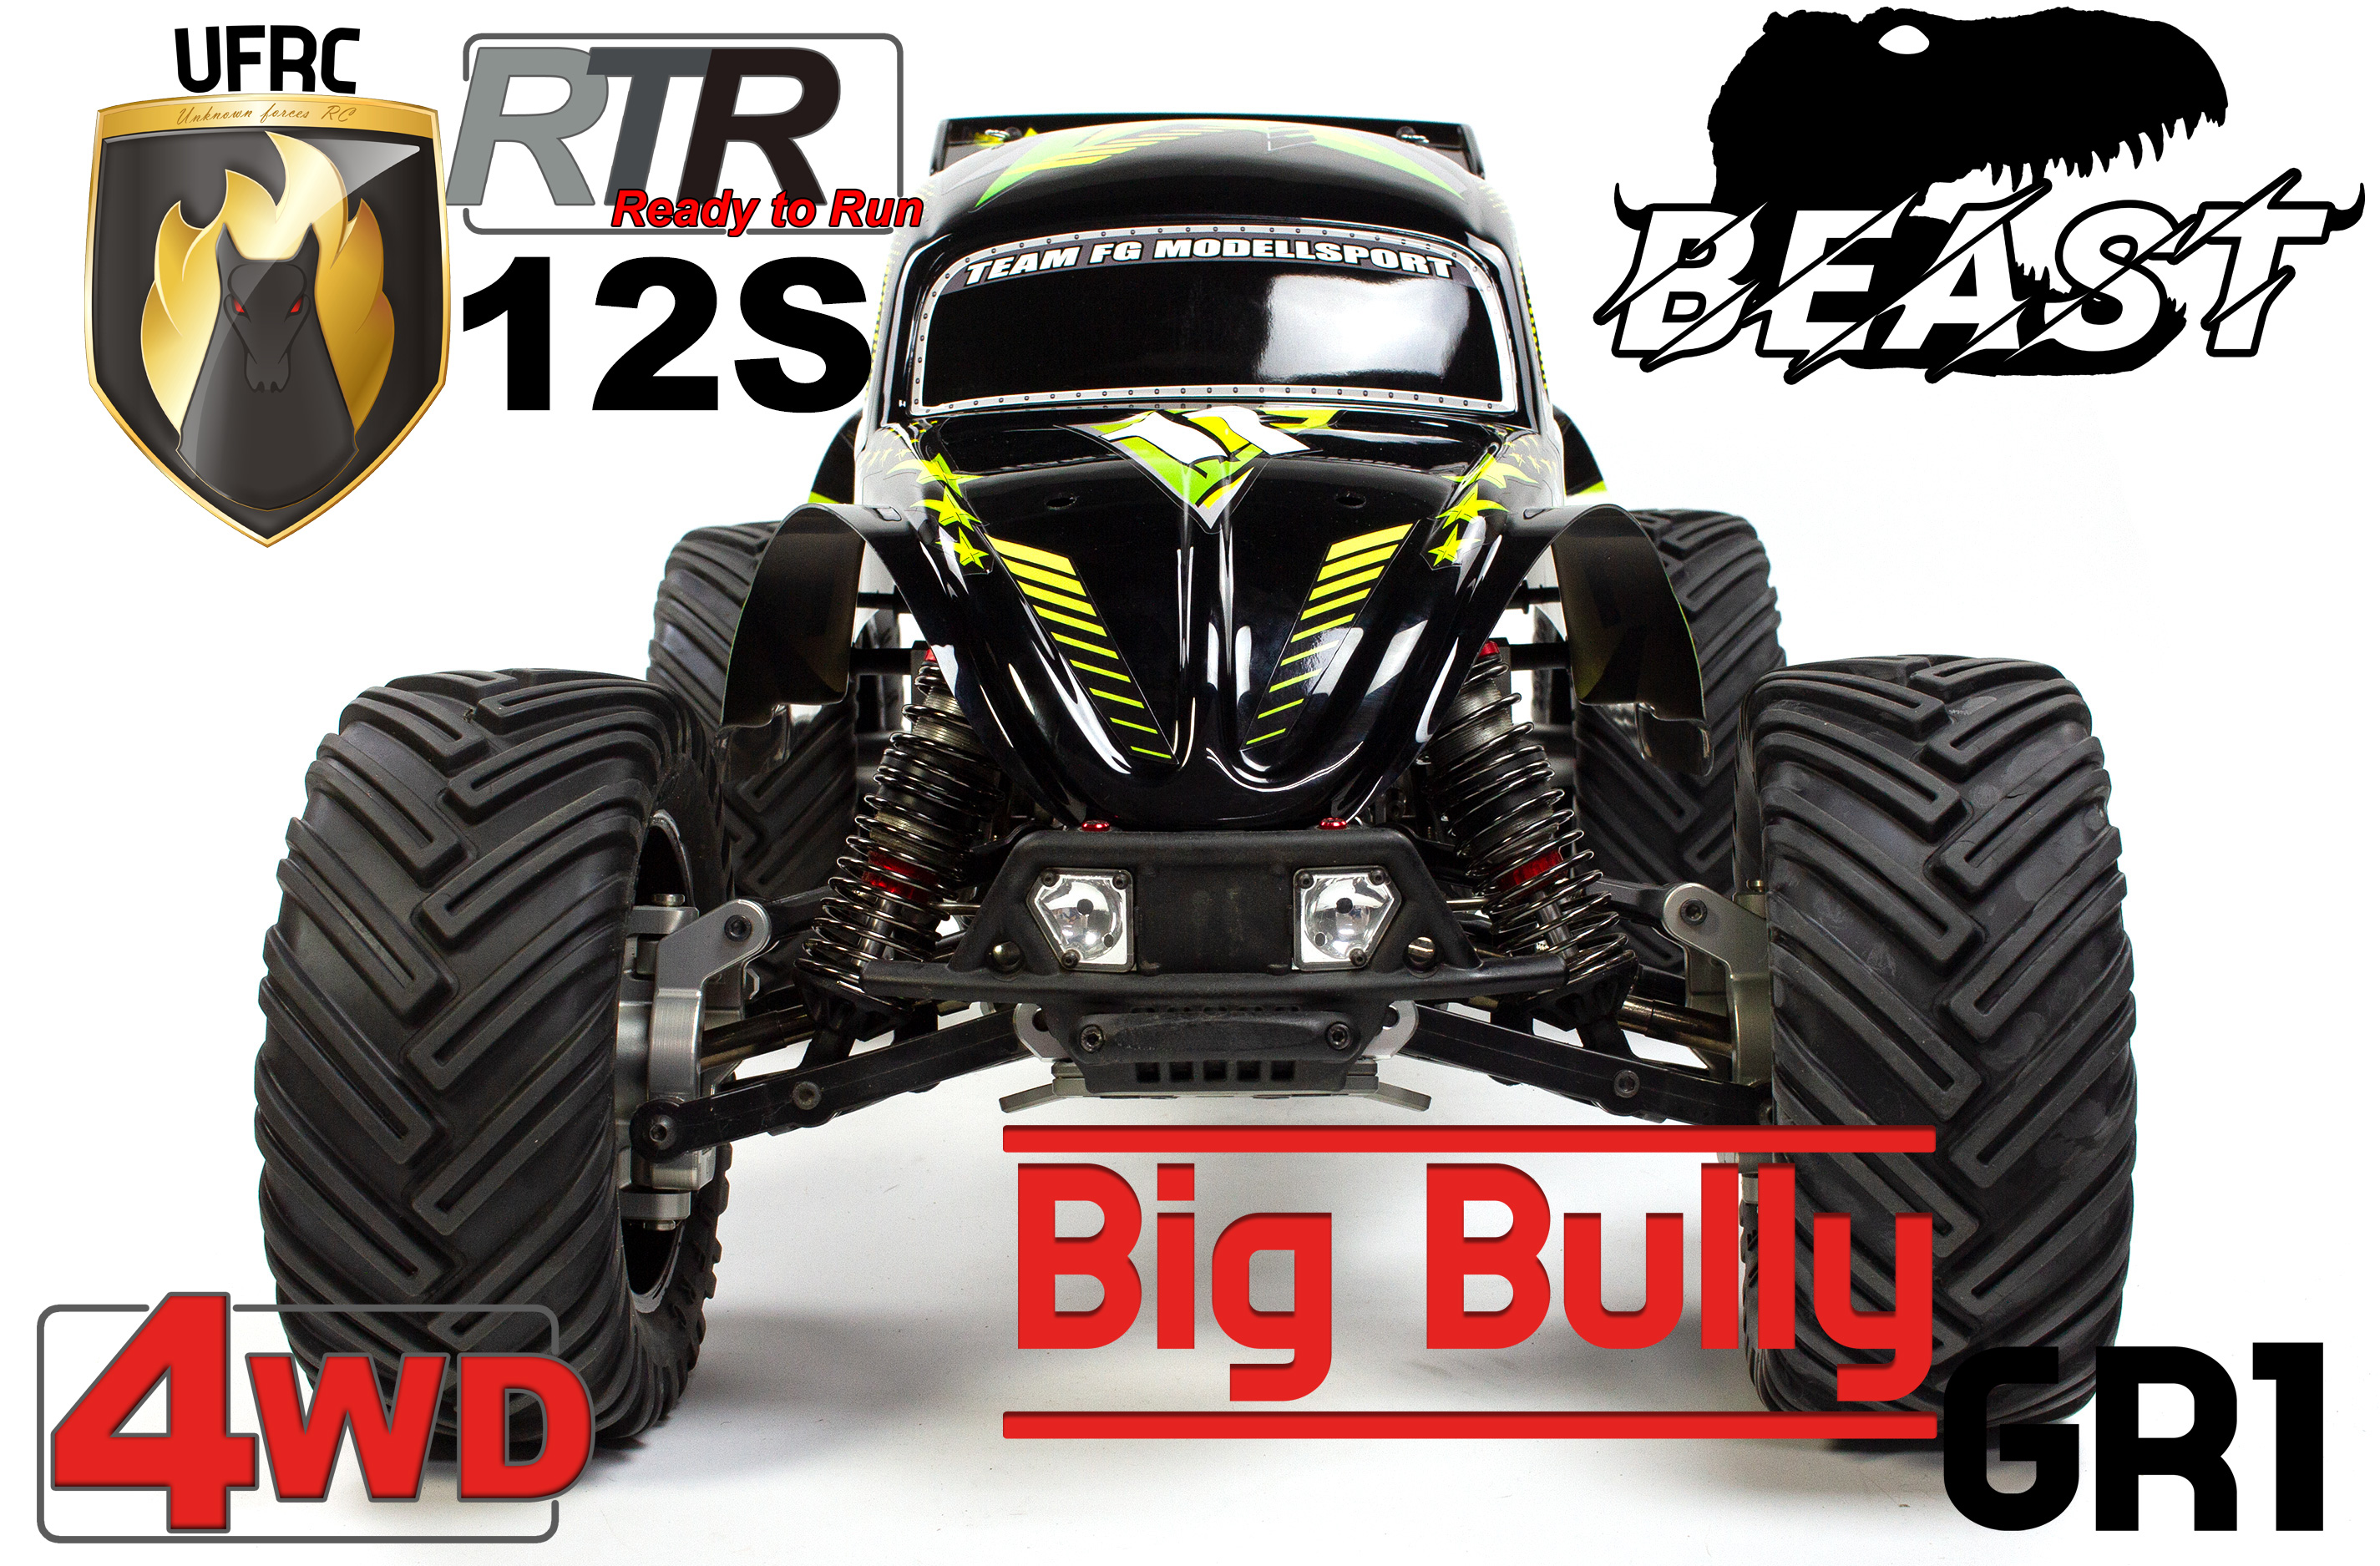 UFRC Big Bully GR1 4WD 1:5 Brushless Buggy 12S, RTR Version